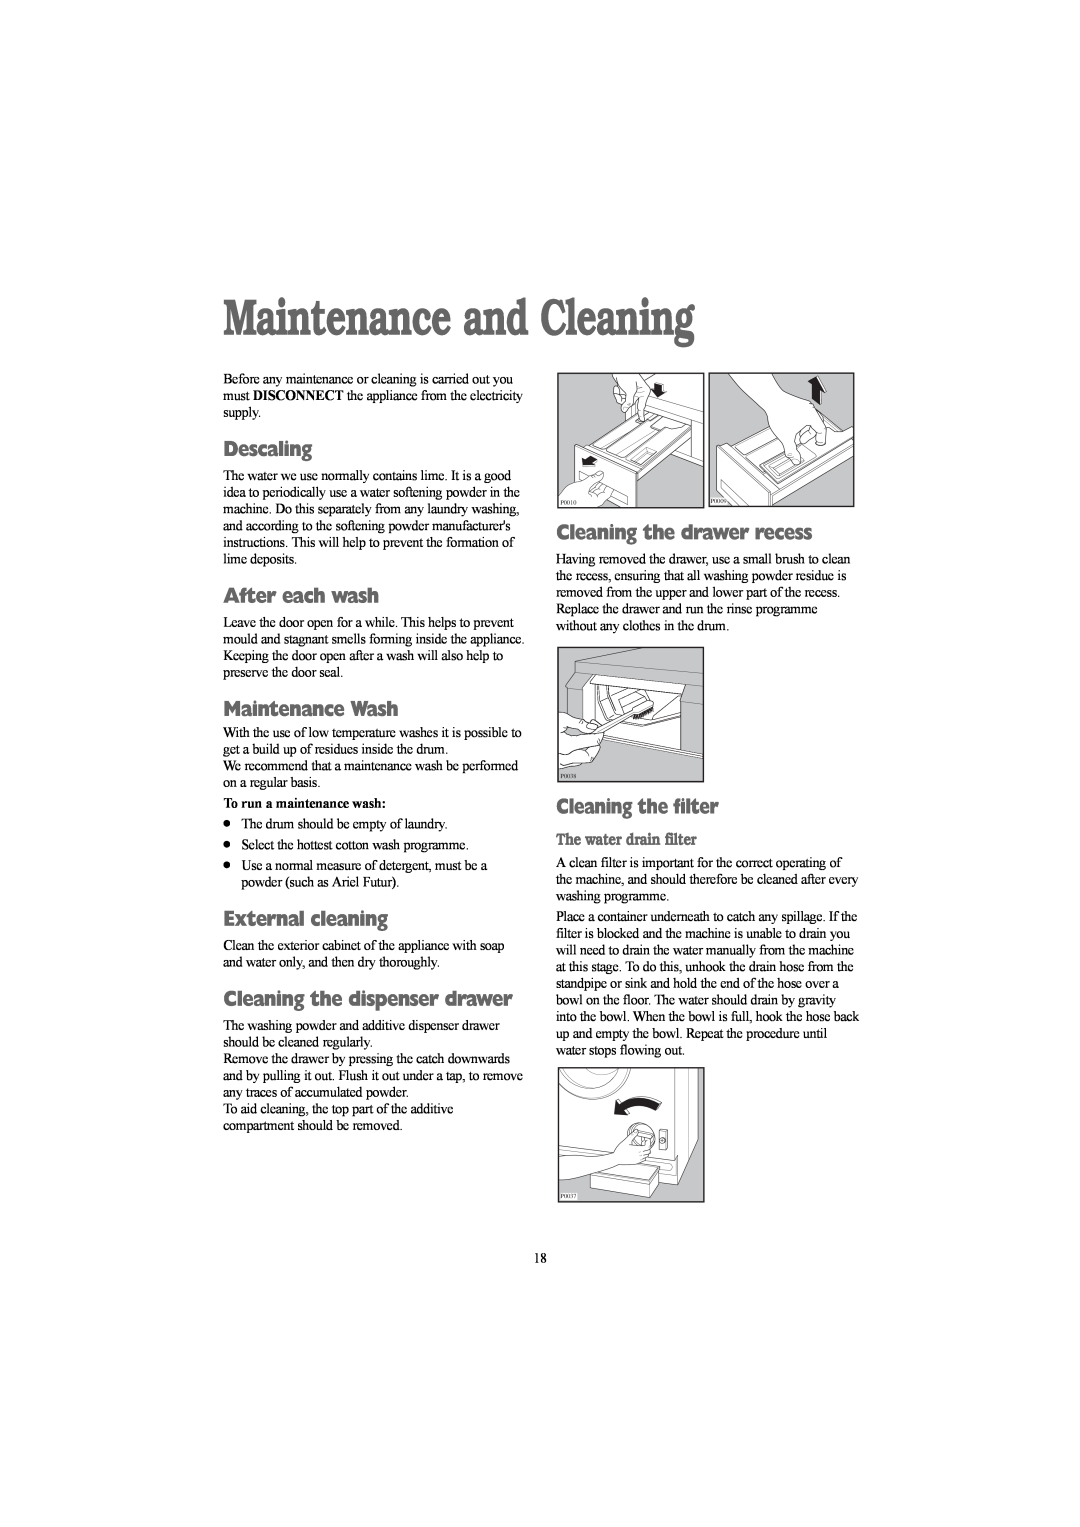 Electrolux EWD 1214 I manual Maintenance and Cleaning, Descaling, After each wash, Maintenance Wash, External cleaning 